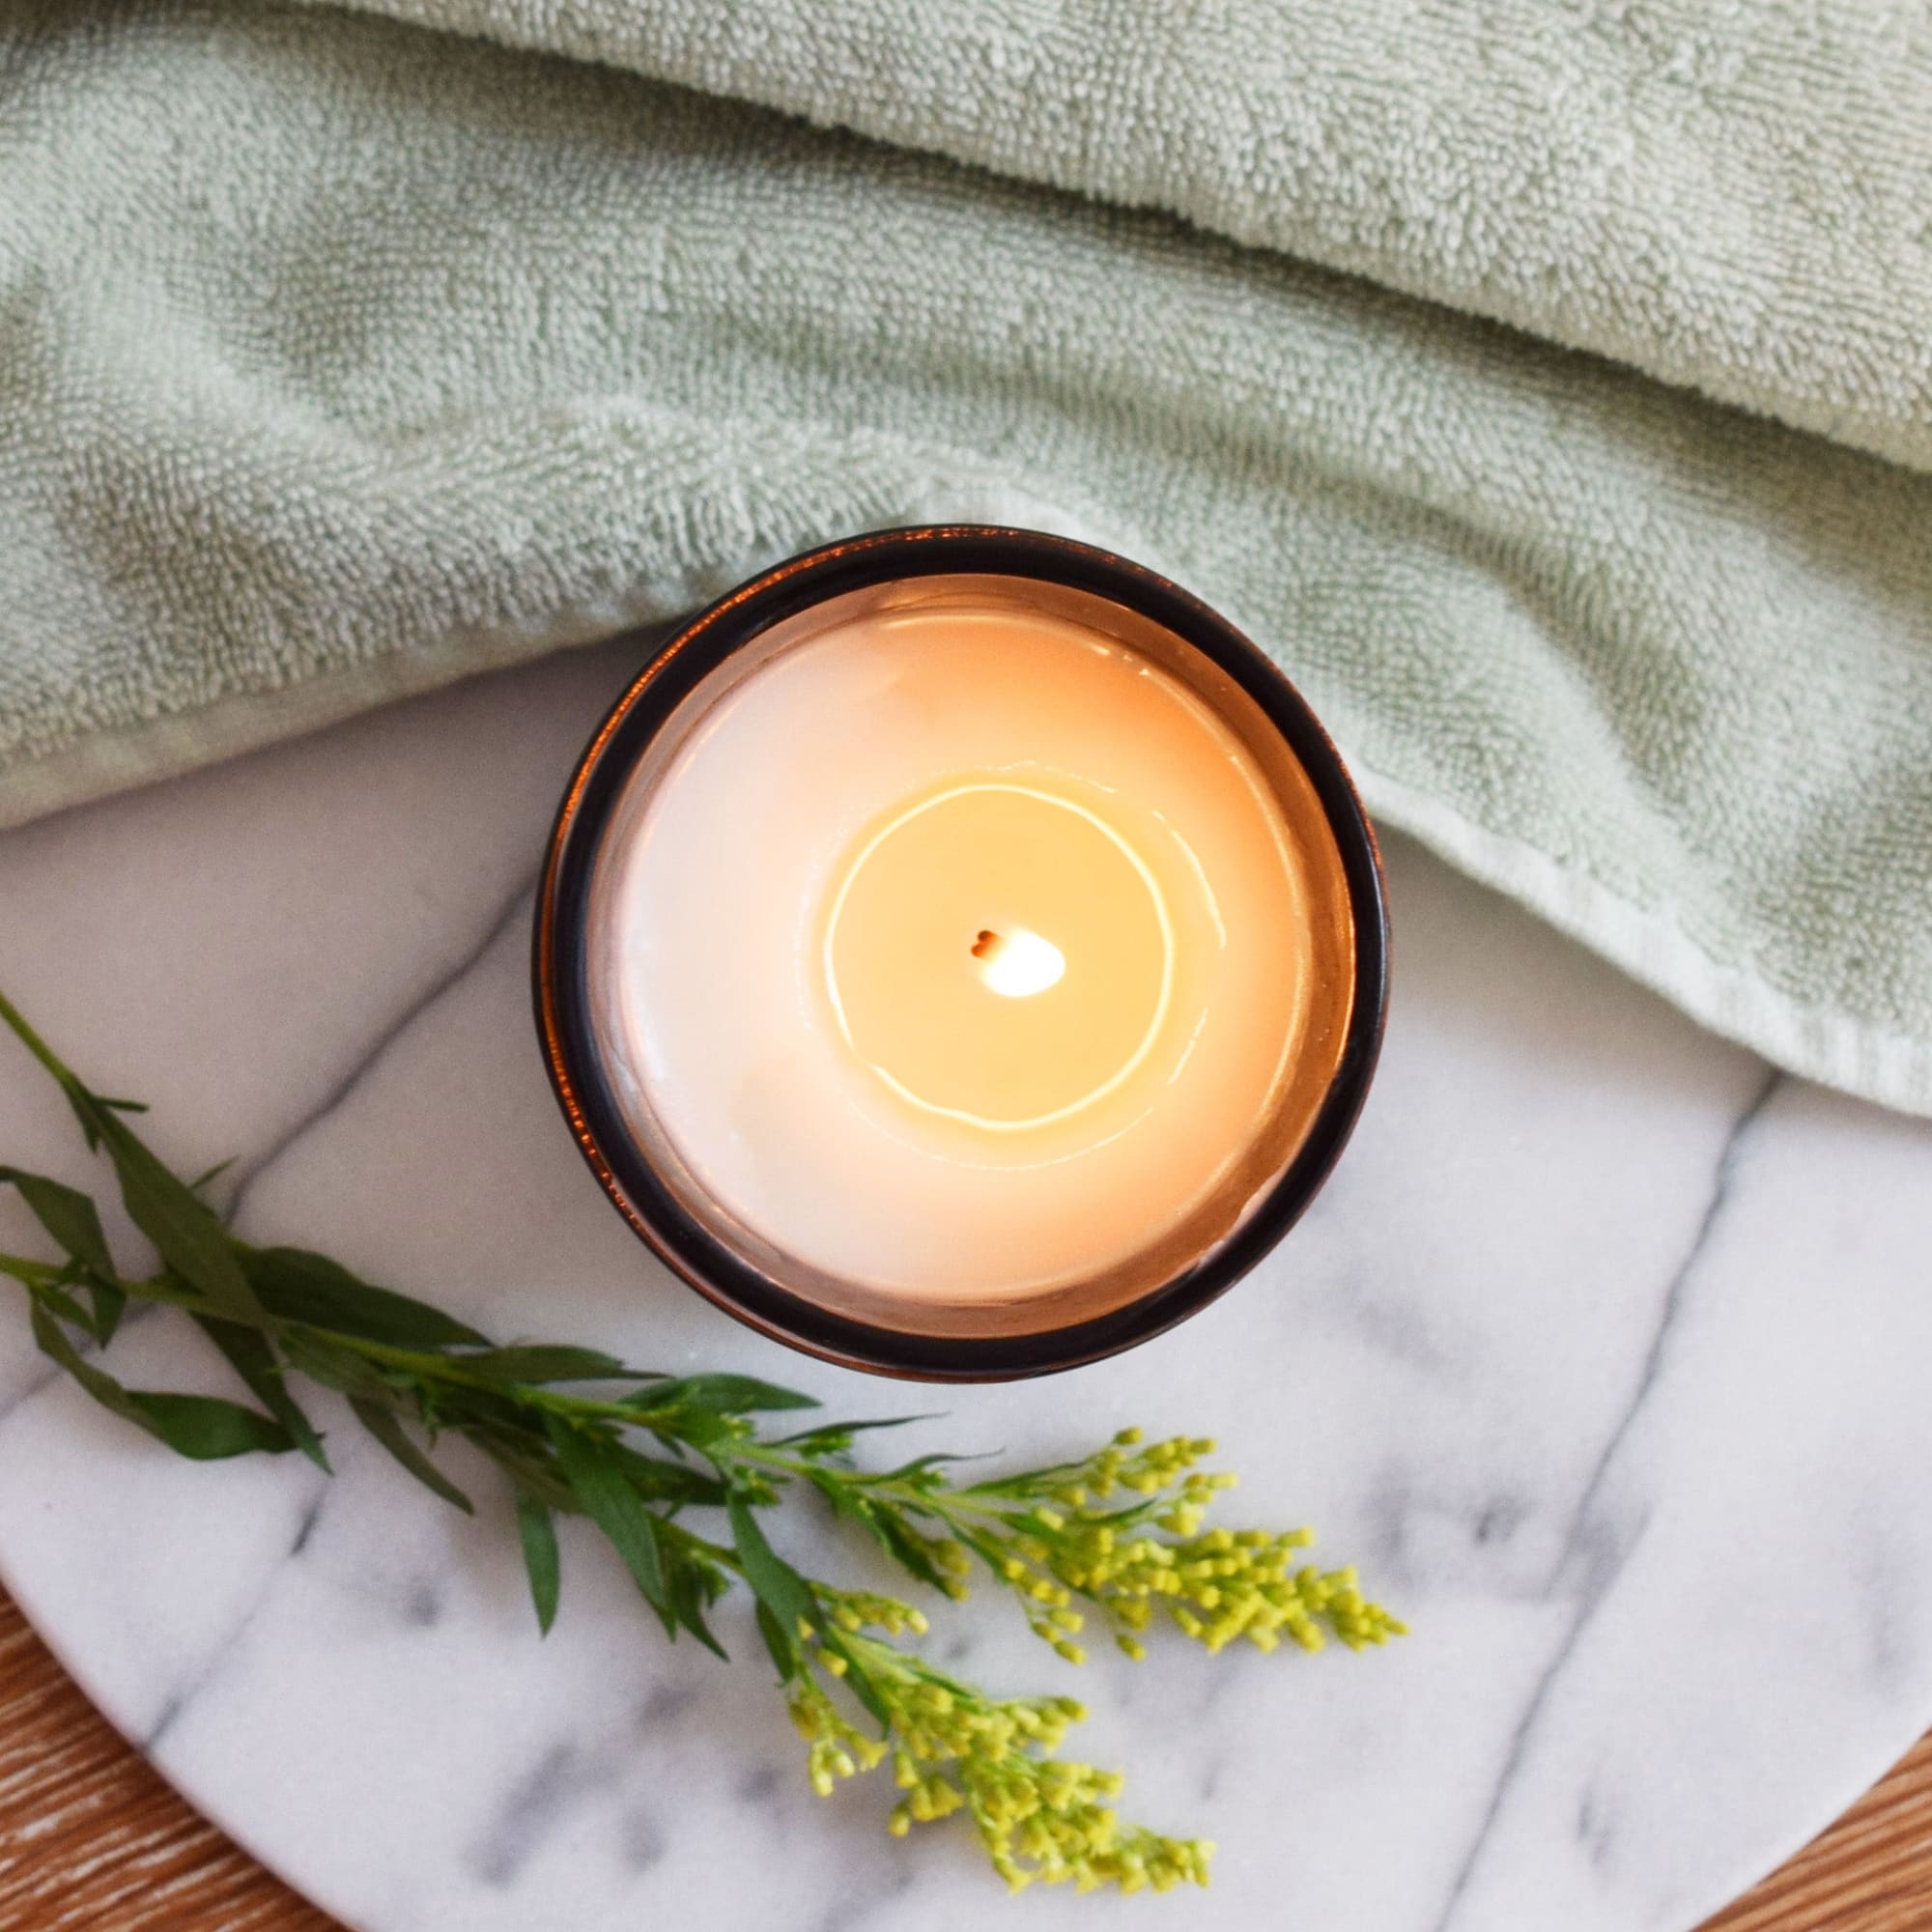 Pear & Basil Soy Candle | The Baltic Club